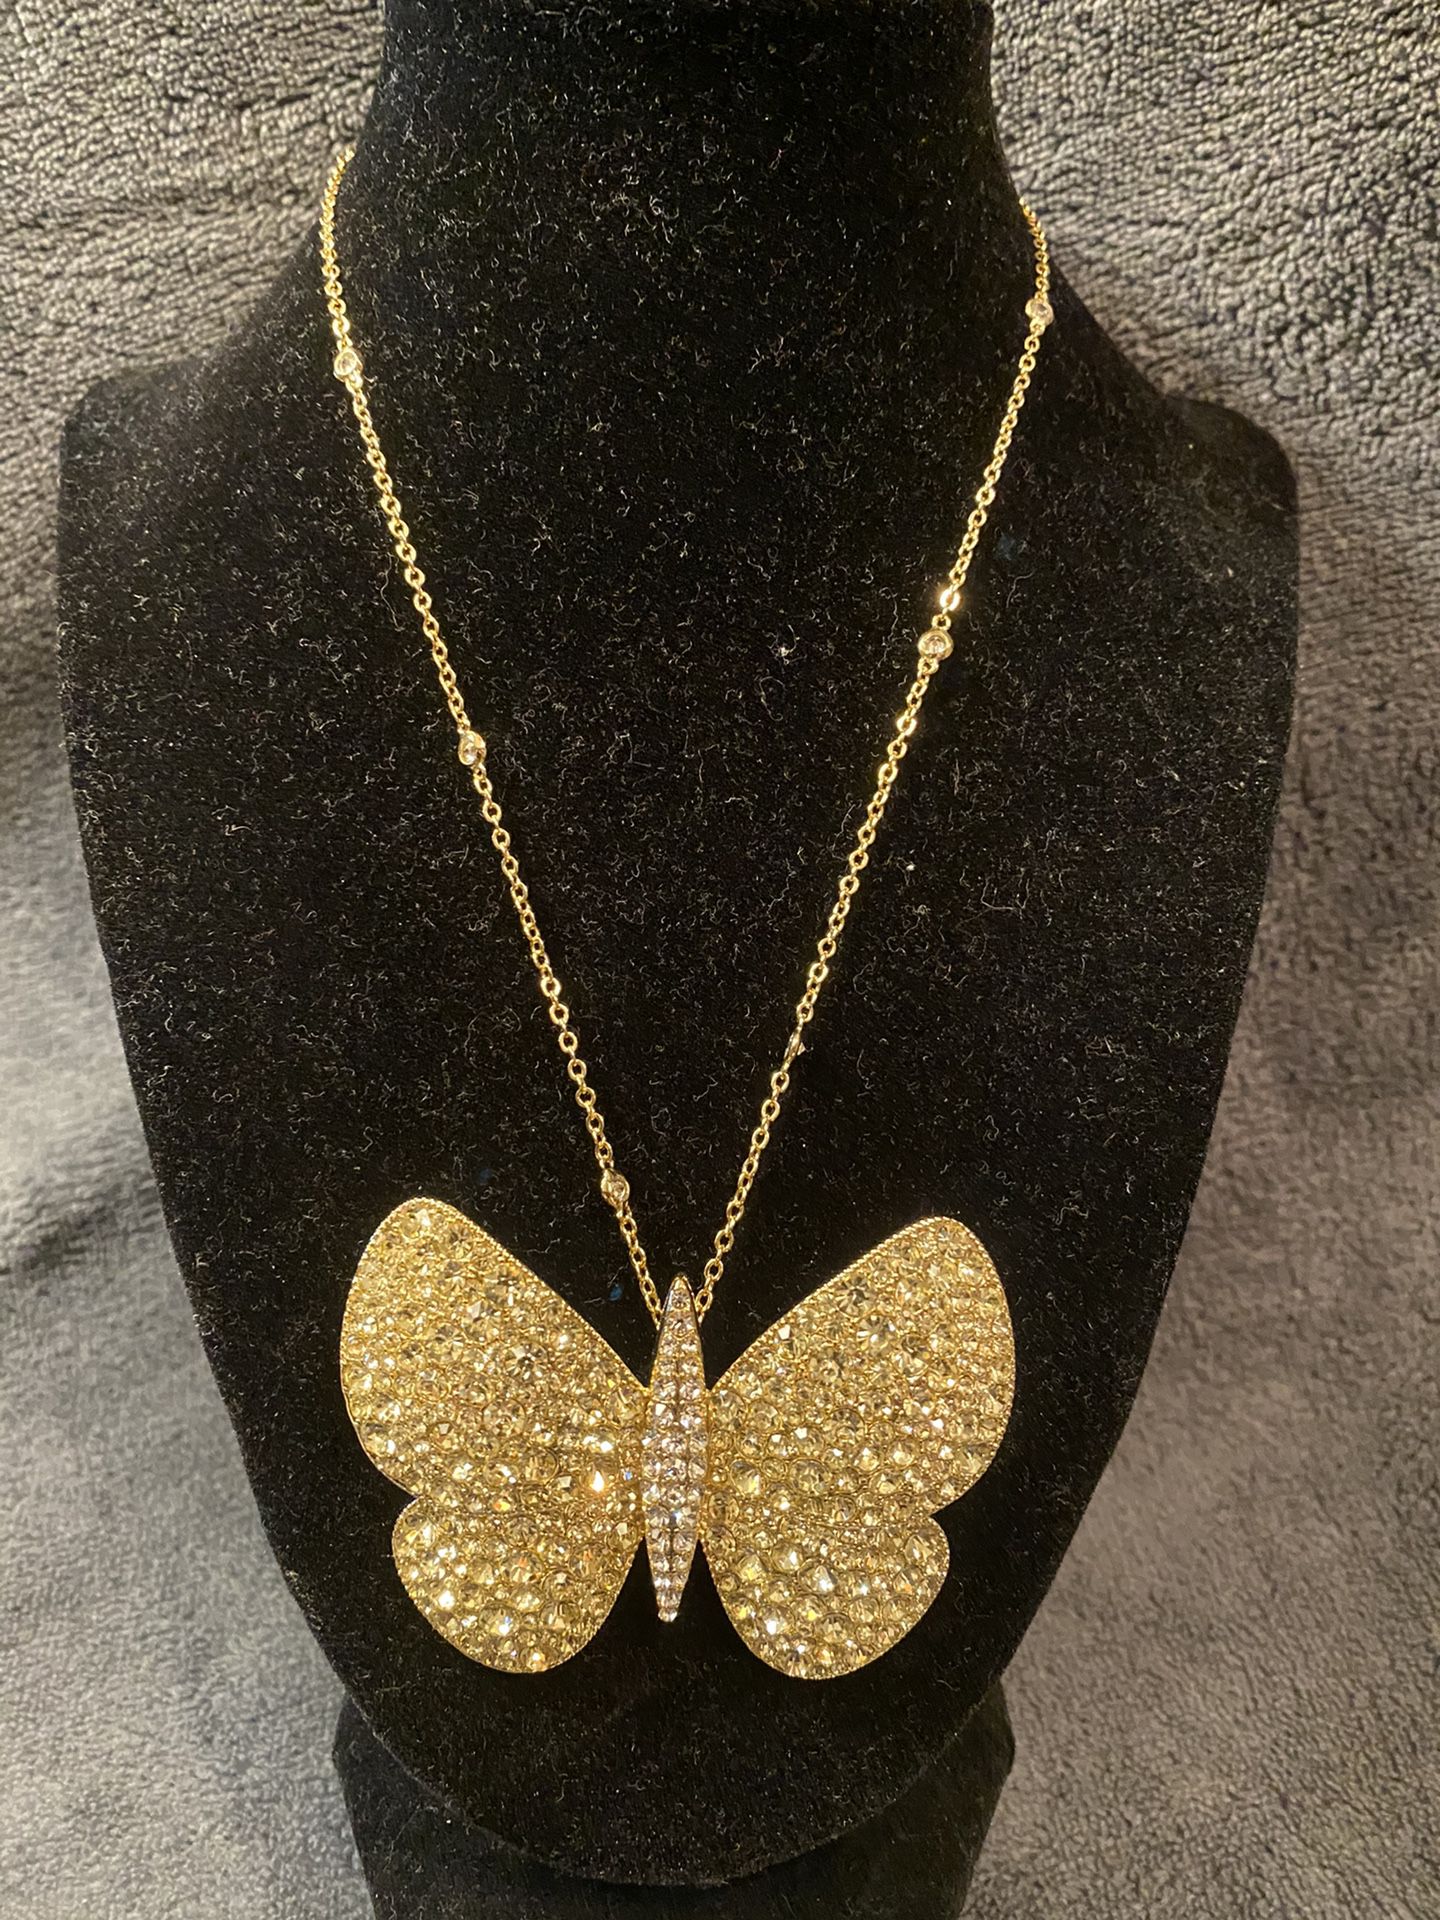 Butterfly Pin/pendant Necklace